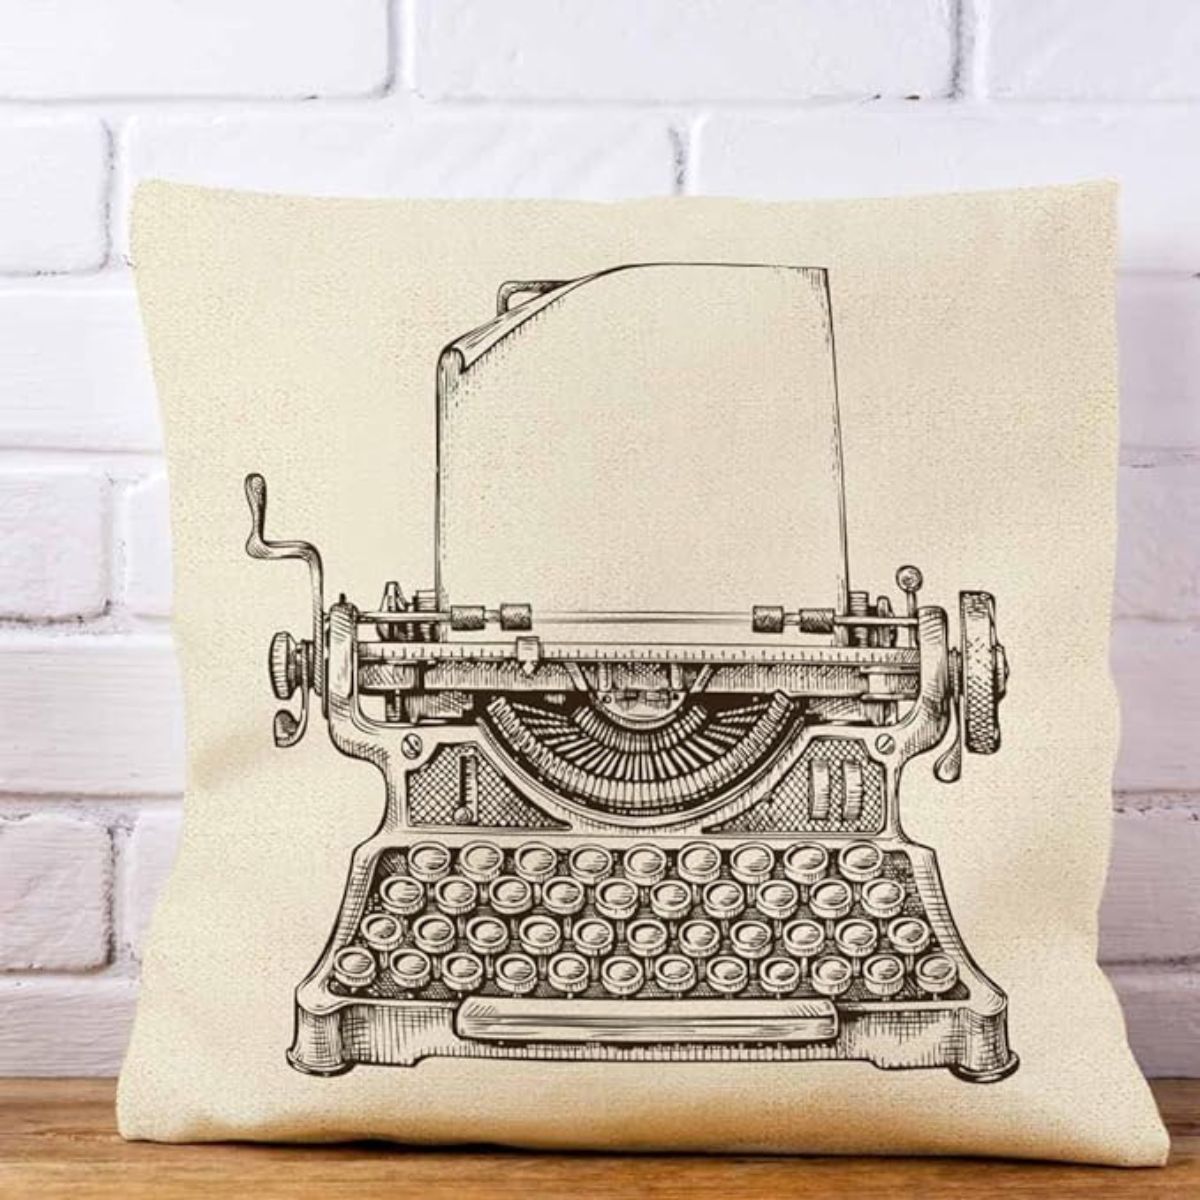 18 Inches Vintage Typewriter Pillow Cover